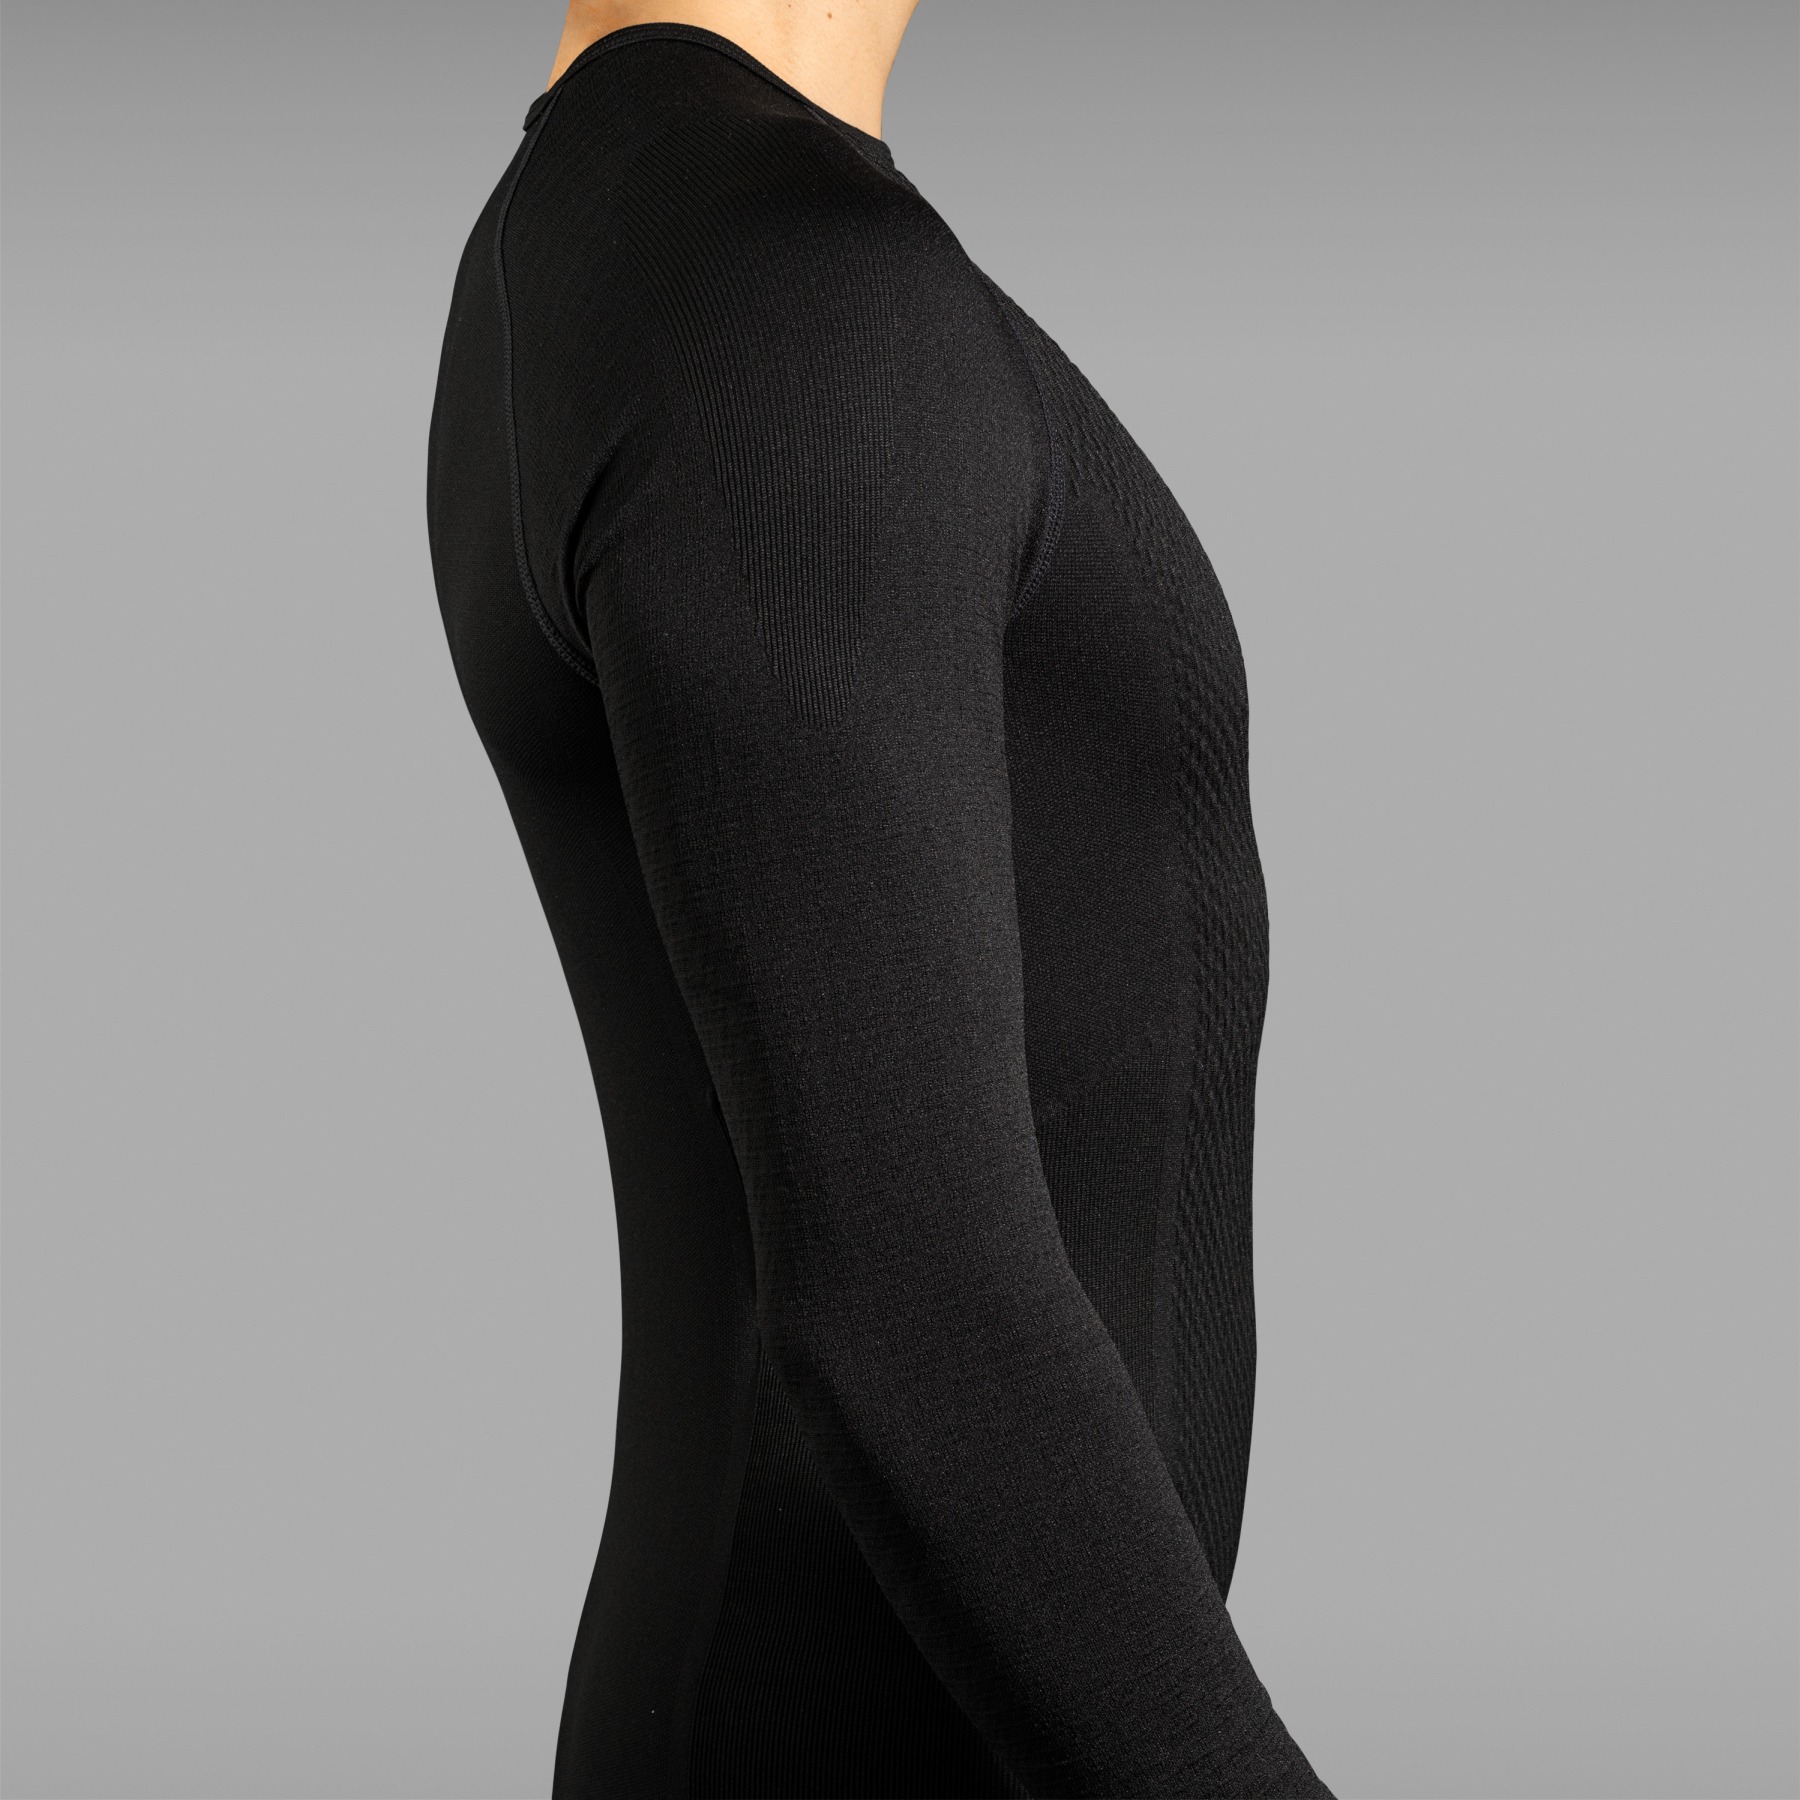 Expert 2 Thermal Seamless Long Sleeve Base Layer – GripGrab